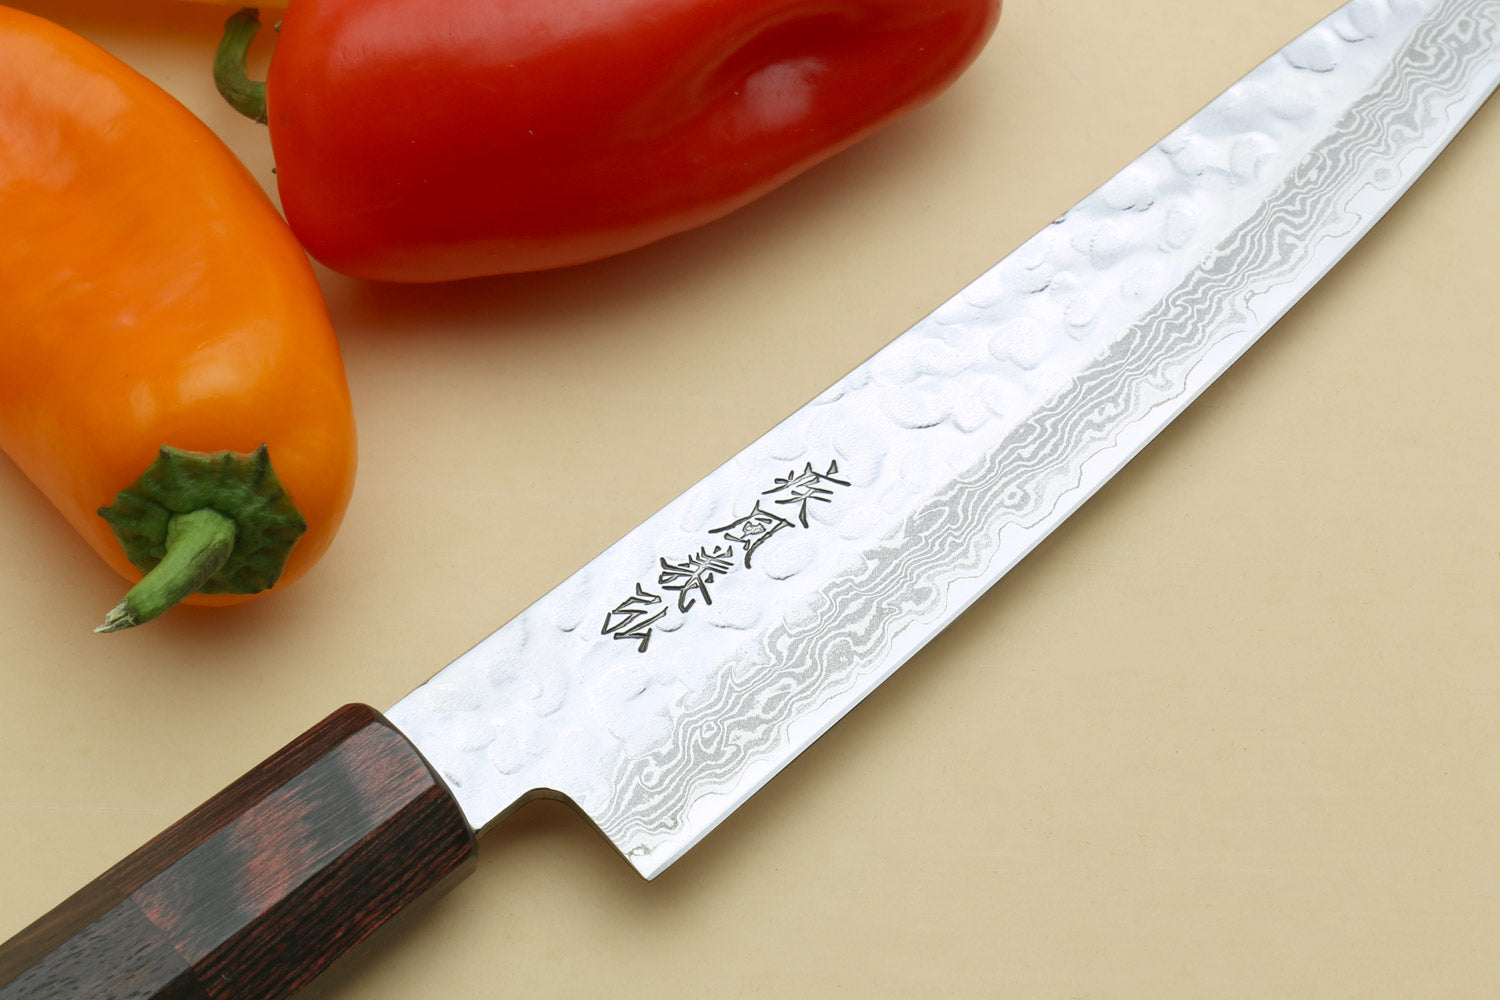 6 CHEF KNIFE